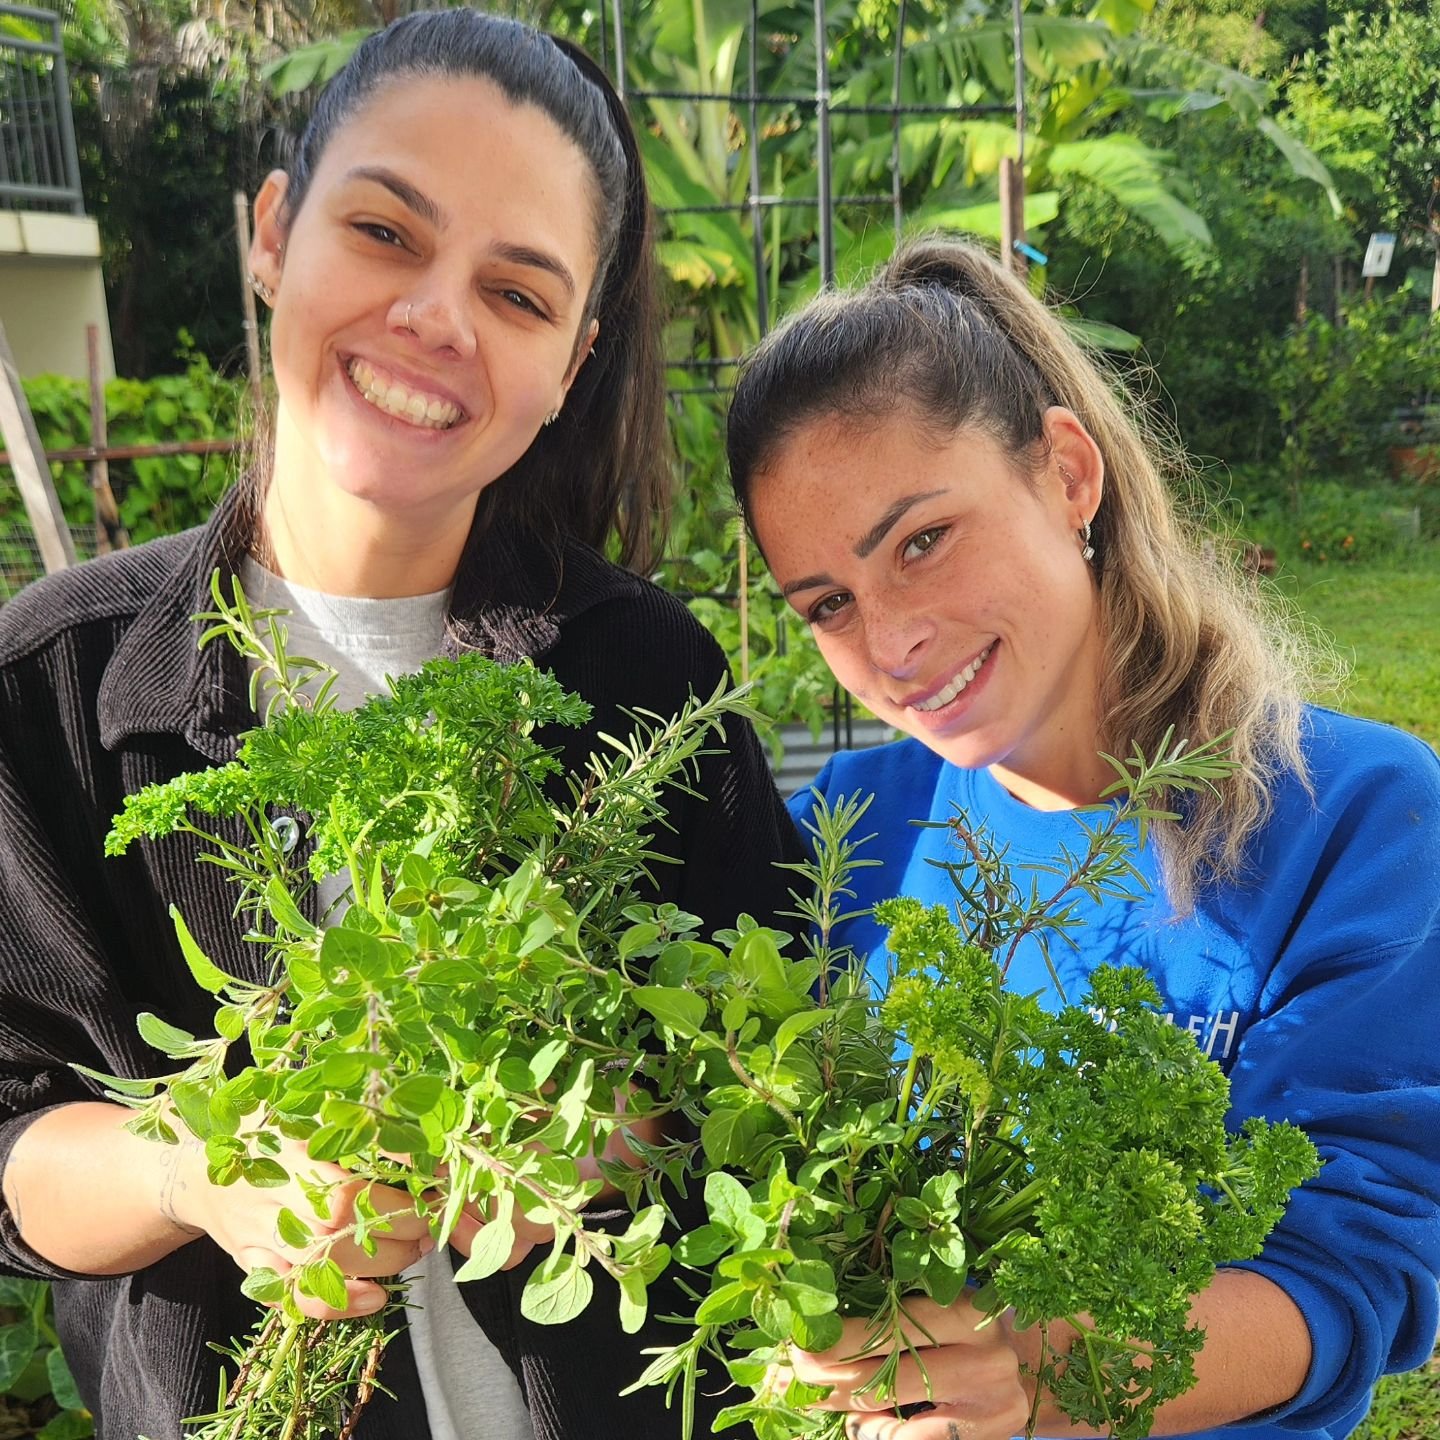 Camilla and Mari making herb bouquets @the.pav.garden 

These are made from parsley, oregano and rosemary and can sit in a jar of water to last longer 💚

We're demonstrating circular economy in action by using food scraps to make compost that helps 